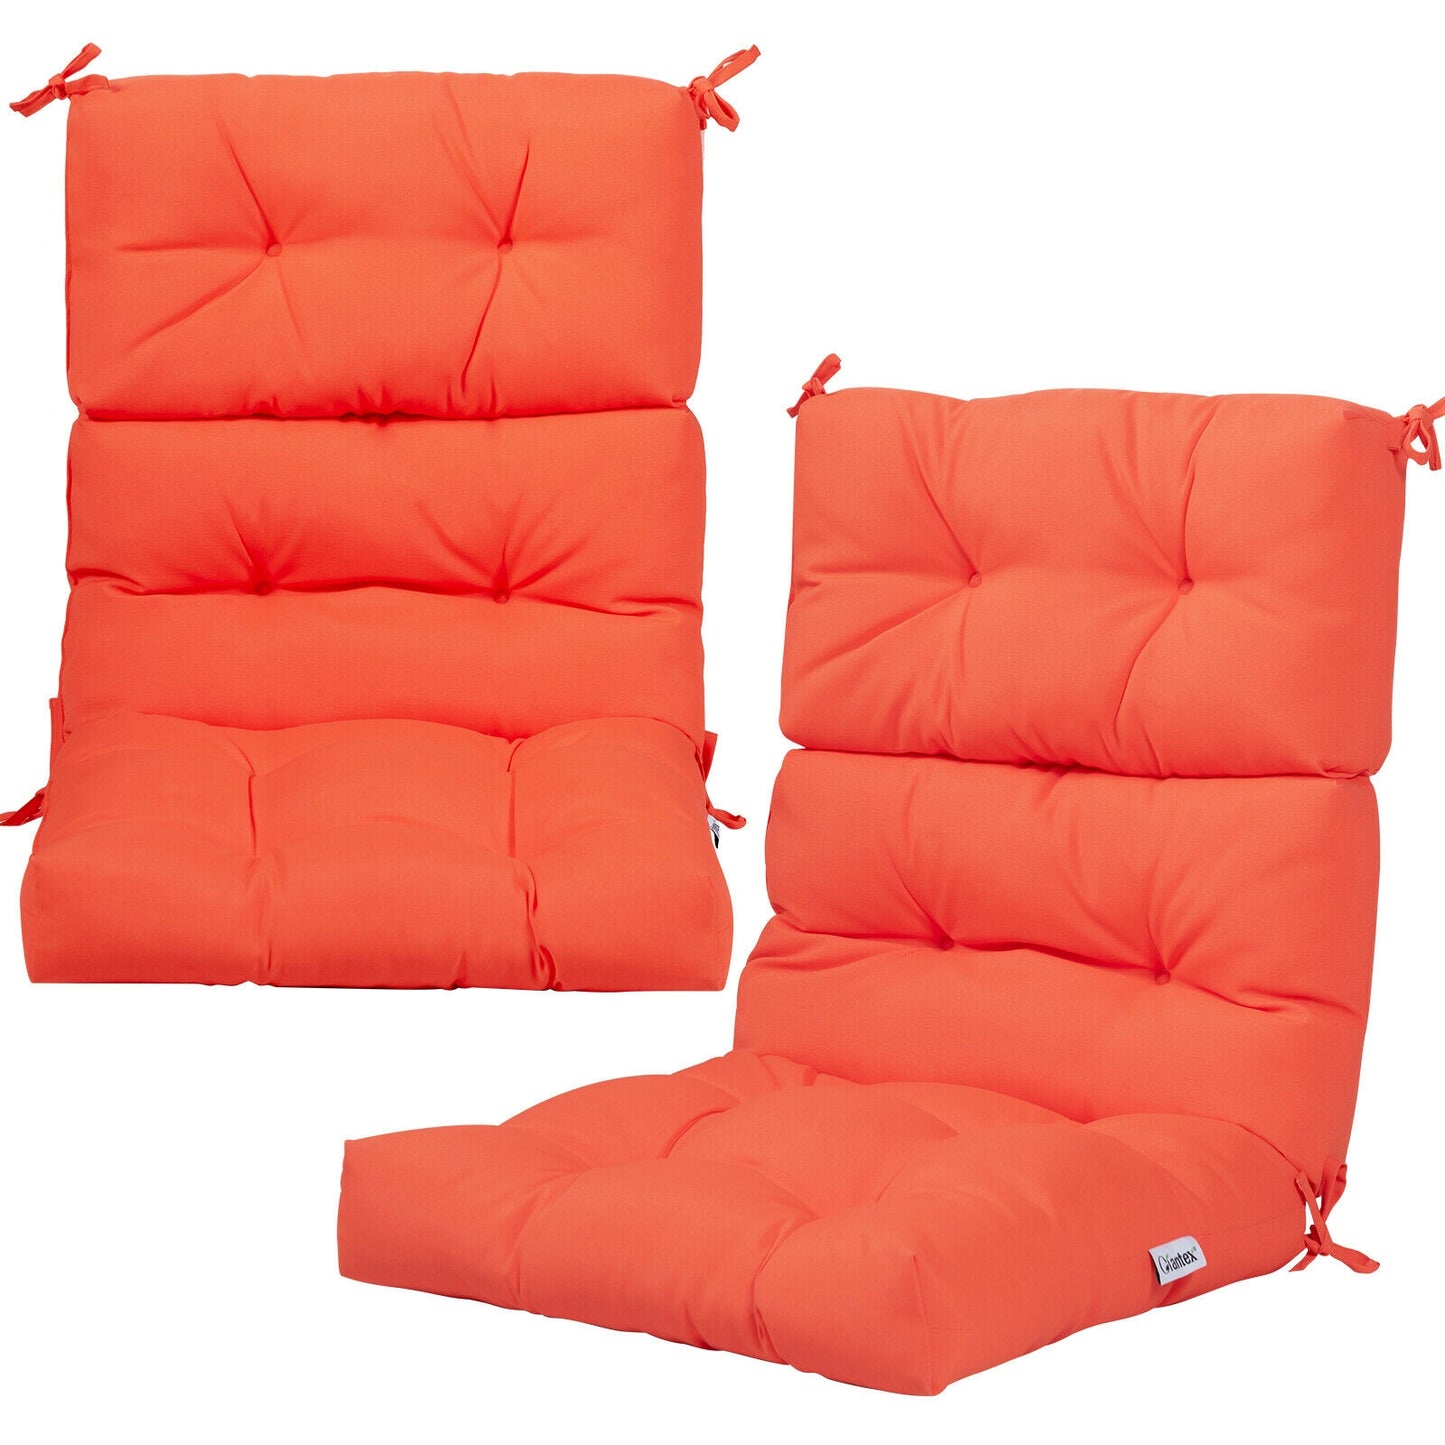 22 x 44 Inch Tufted Outdoor Patio Chair Seating Pad-Orange